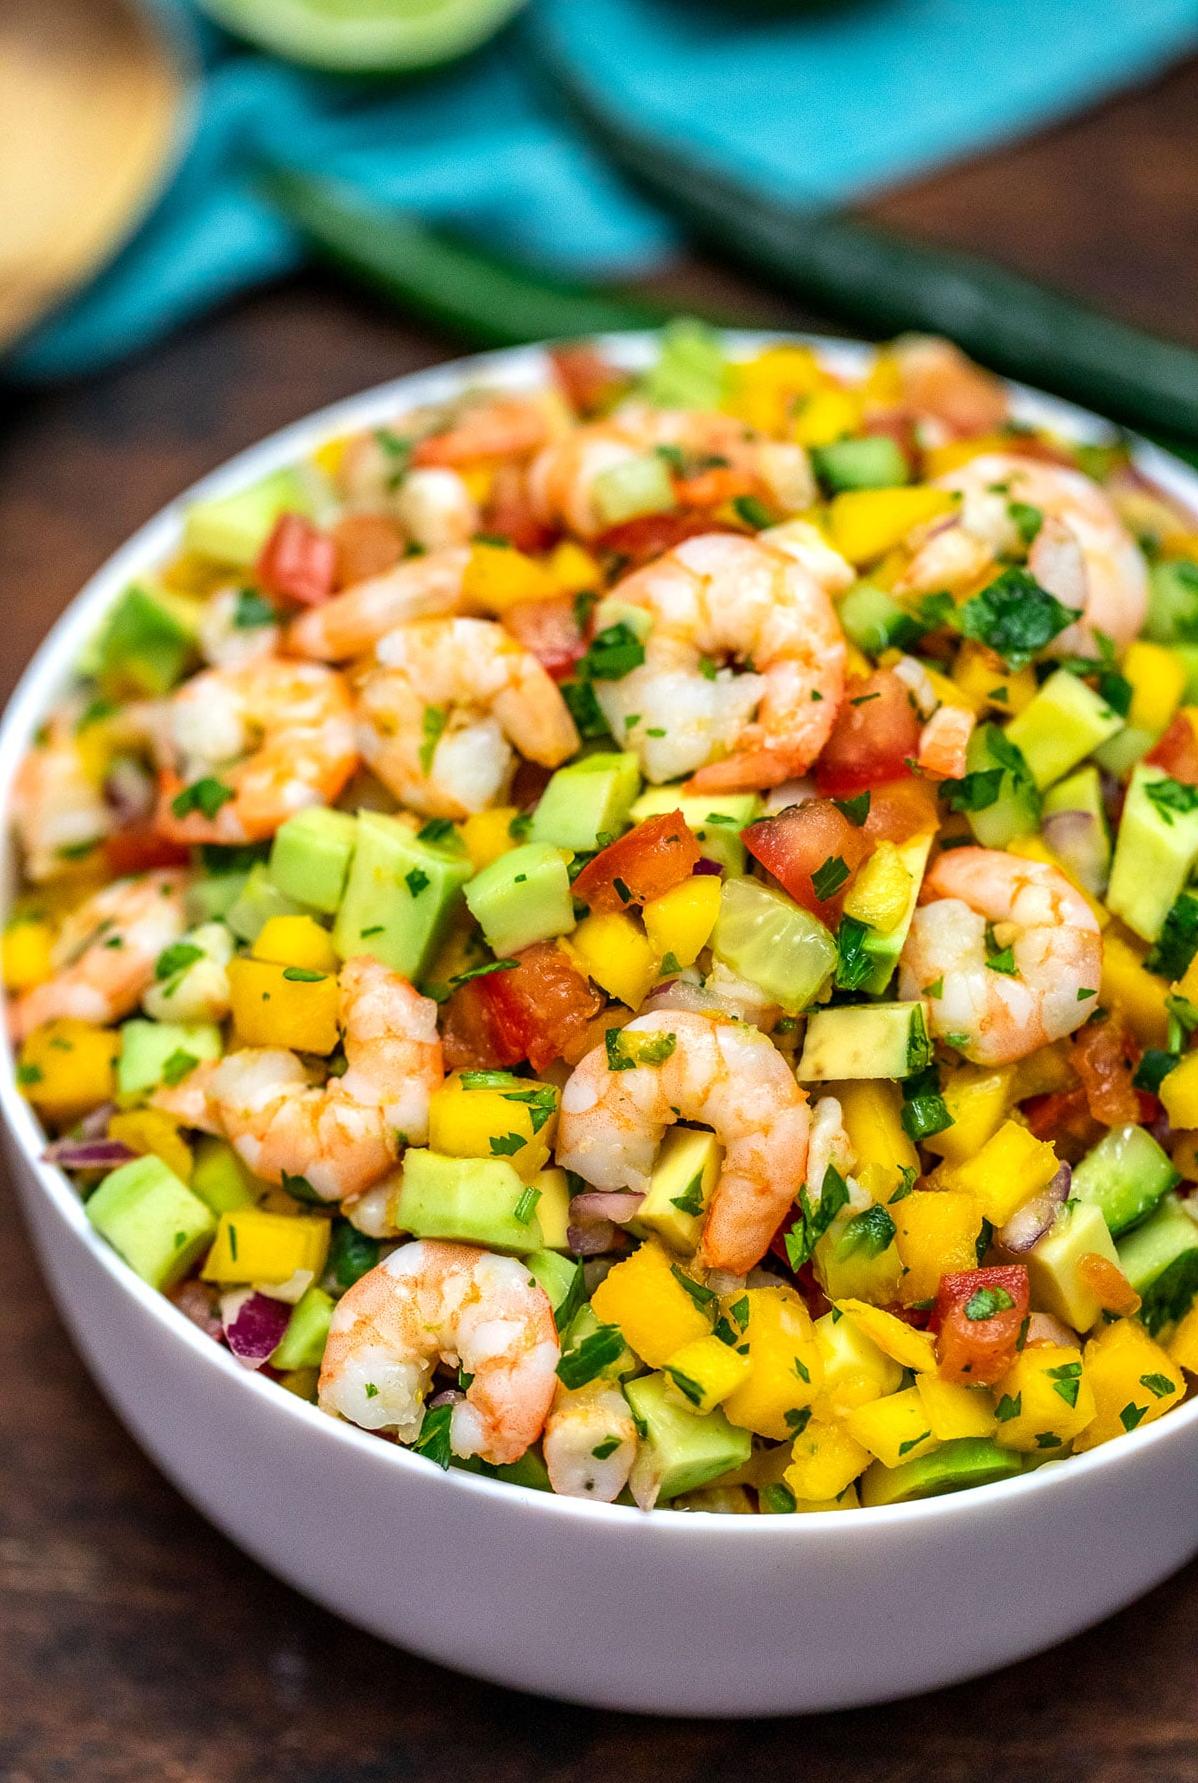  Shrimp never tasted so good! Try this delicious and easy-to-make ceviche recipe.